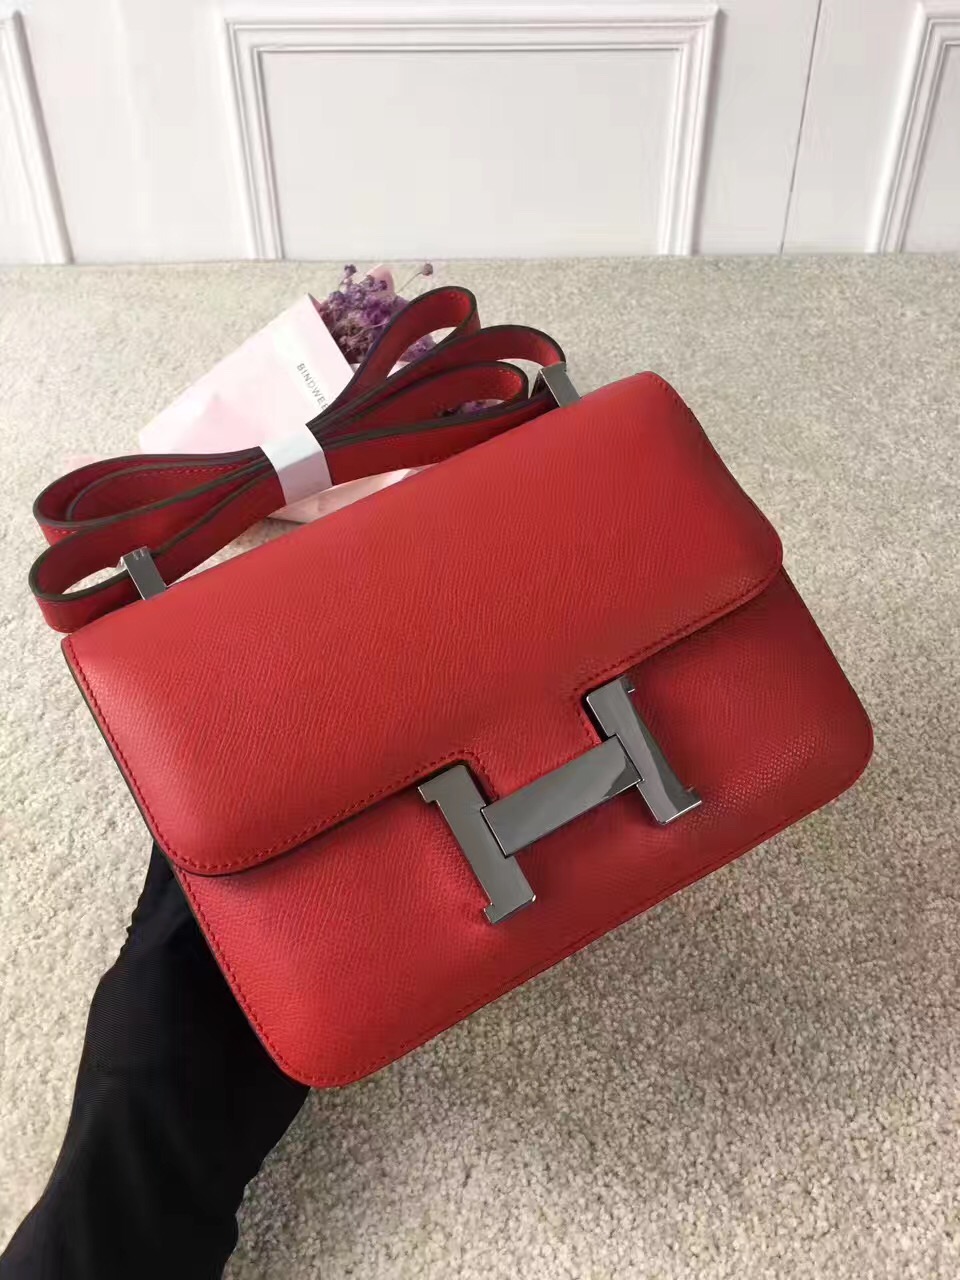 Hermes Constance top leather red handbags